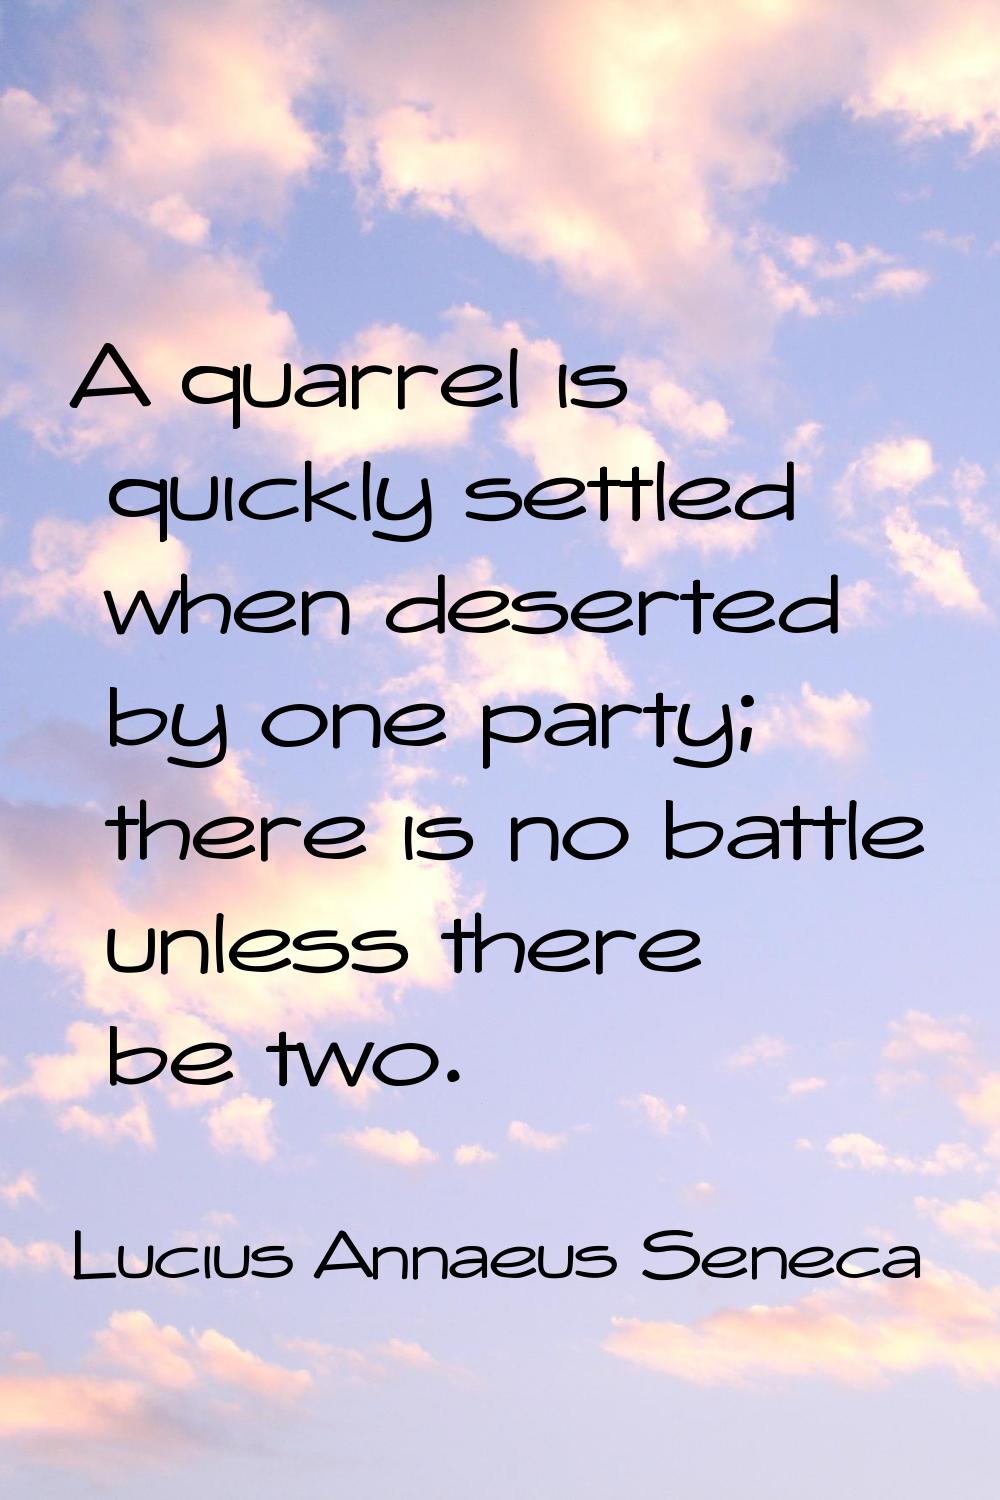 A quarrel is quickly settled when deserted by one party; there is no battle unless there be two.